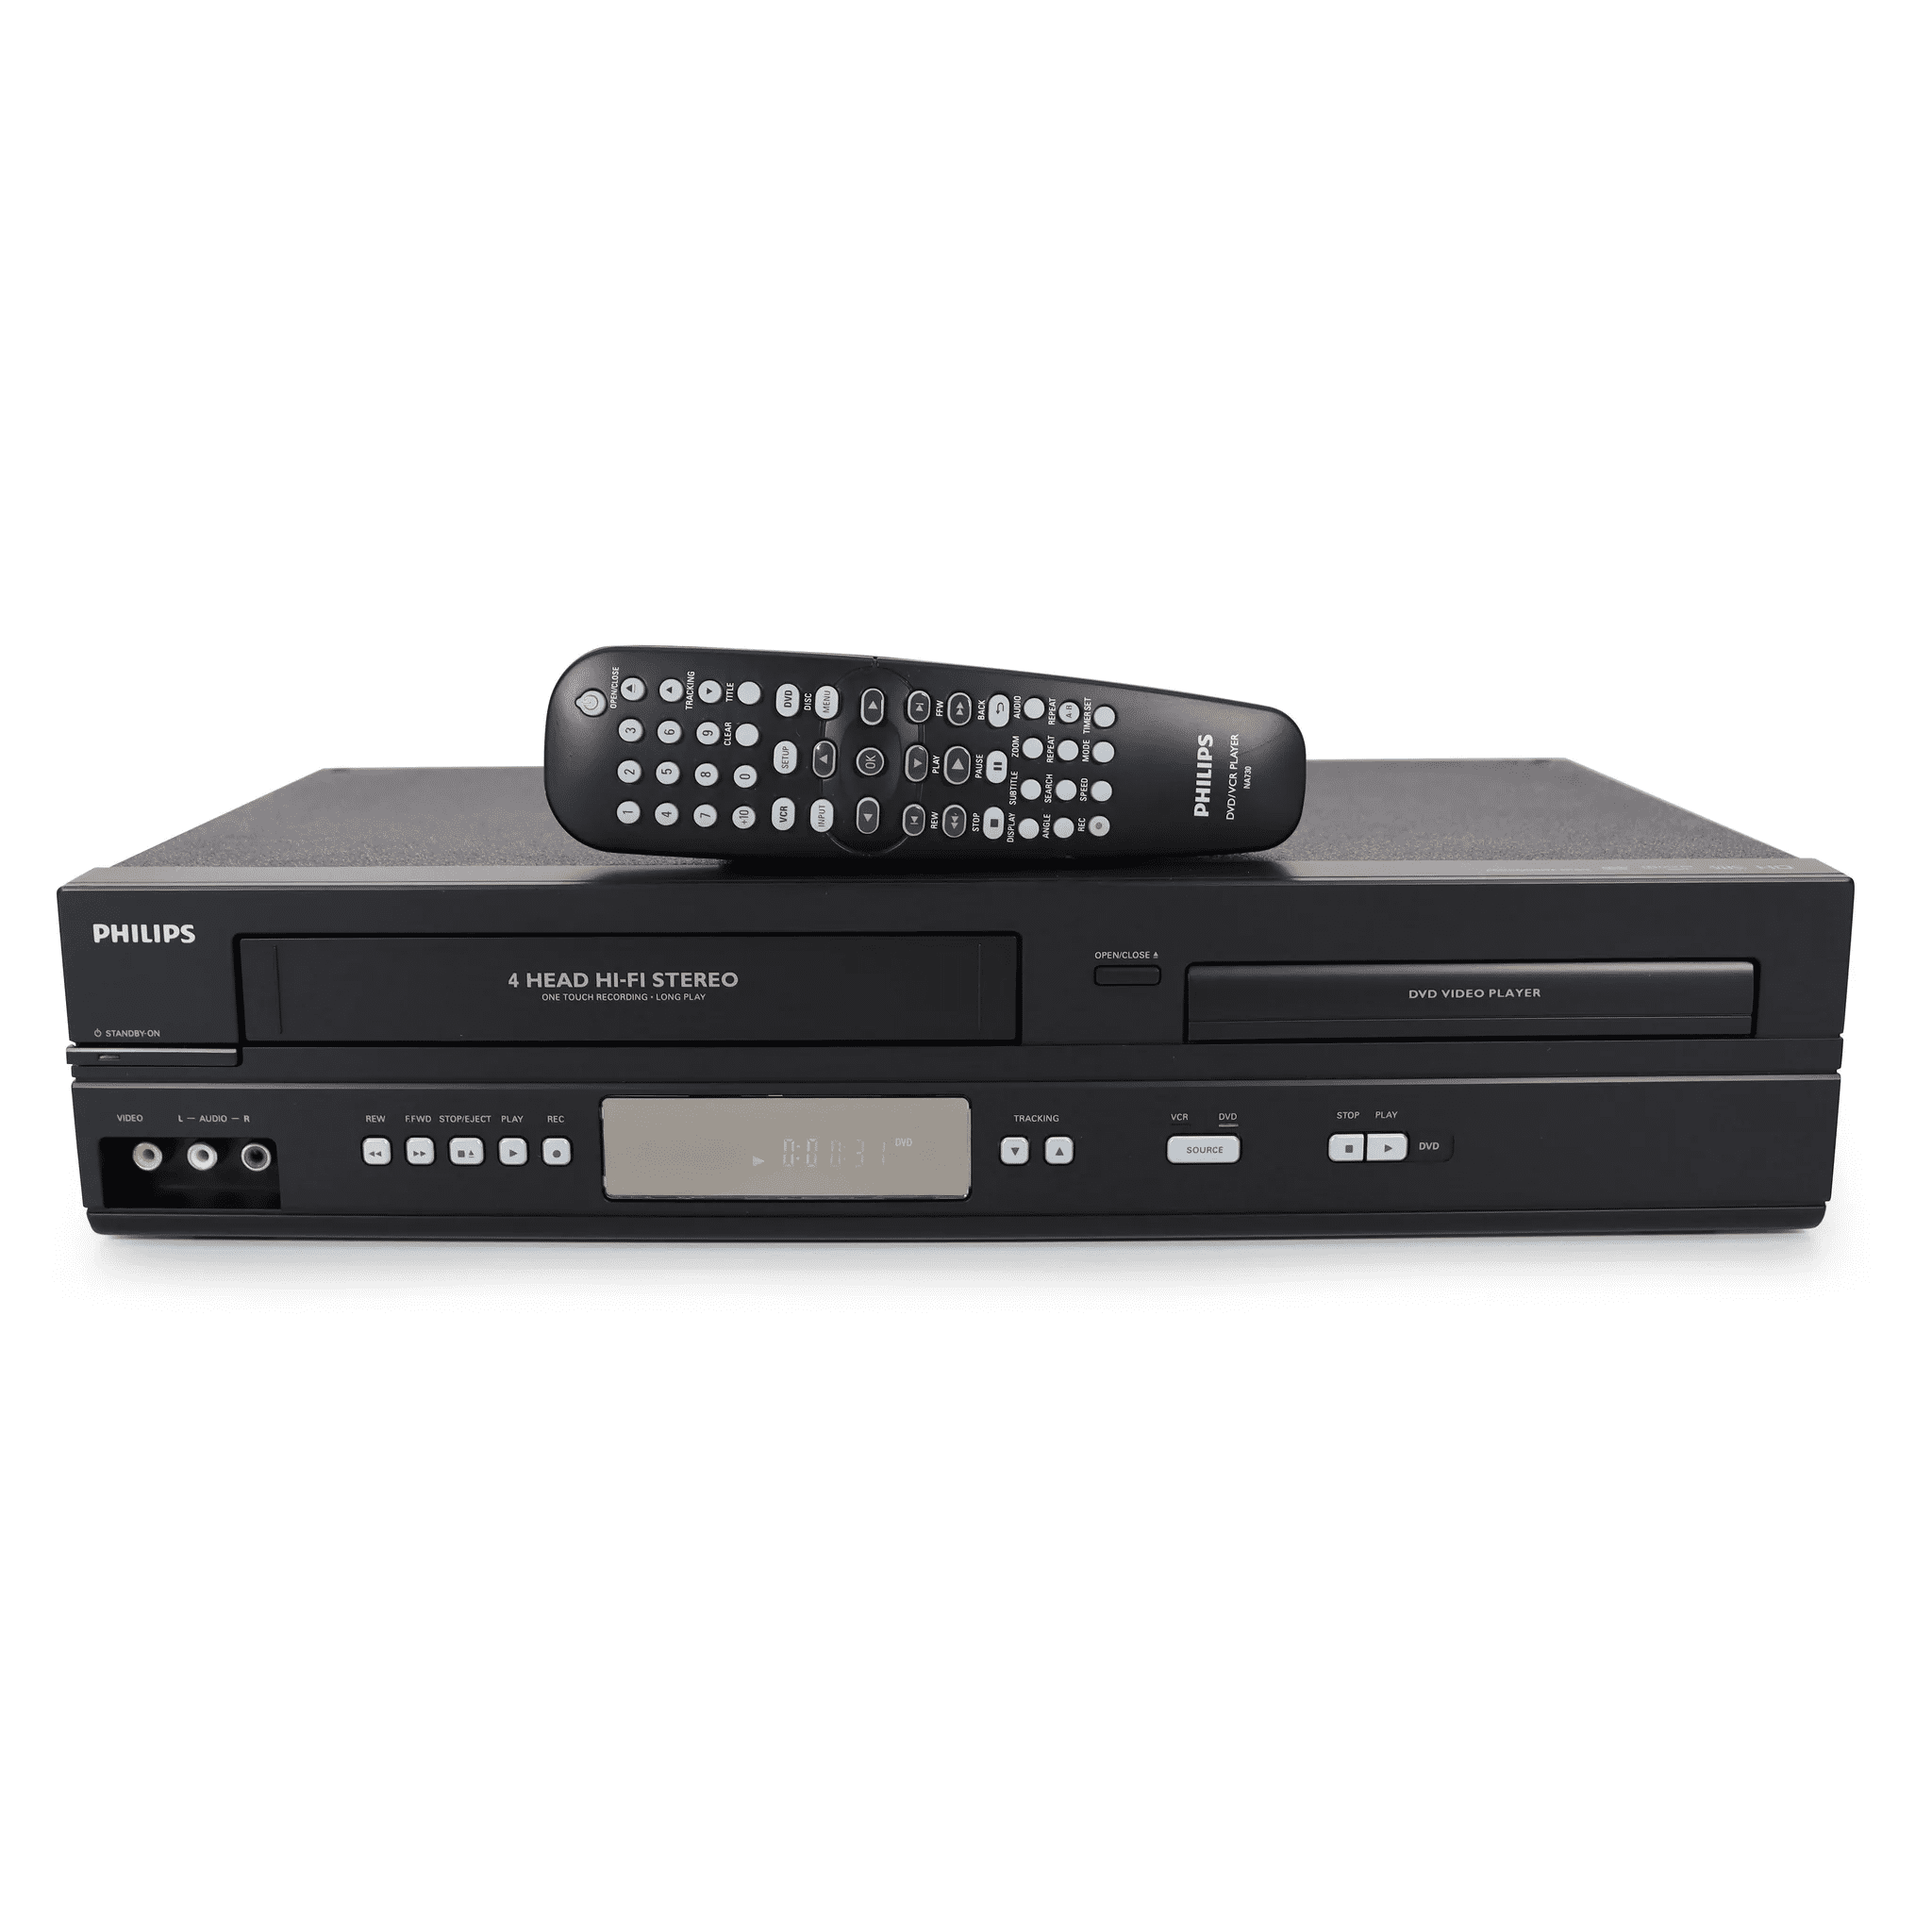 DVP3345V DVD/VCR Combo (NEW) with Remote, Quick Start A/V Cables and HDMI Converter Walmart.com